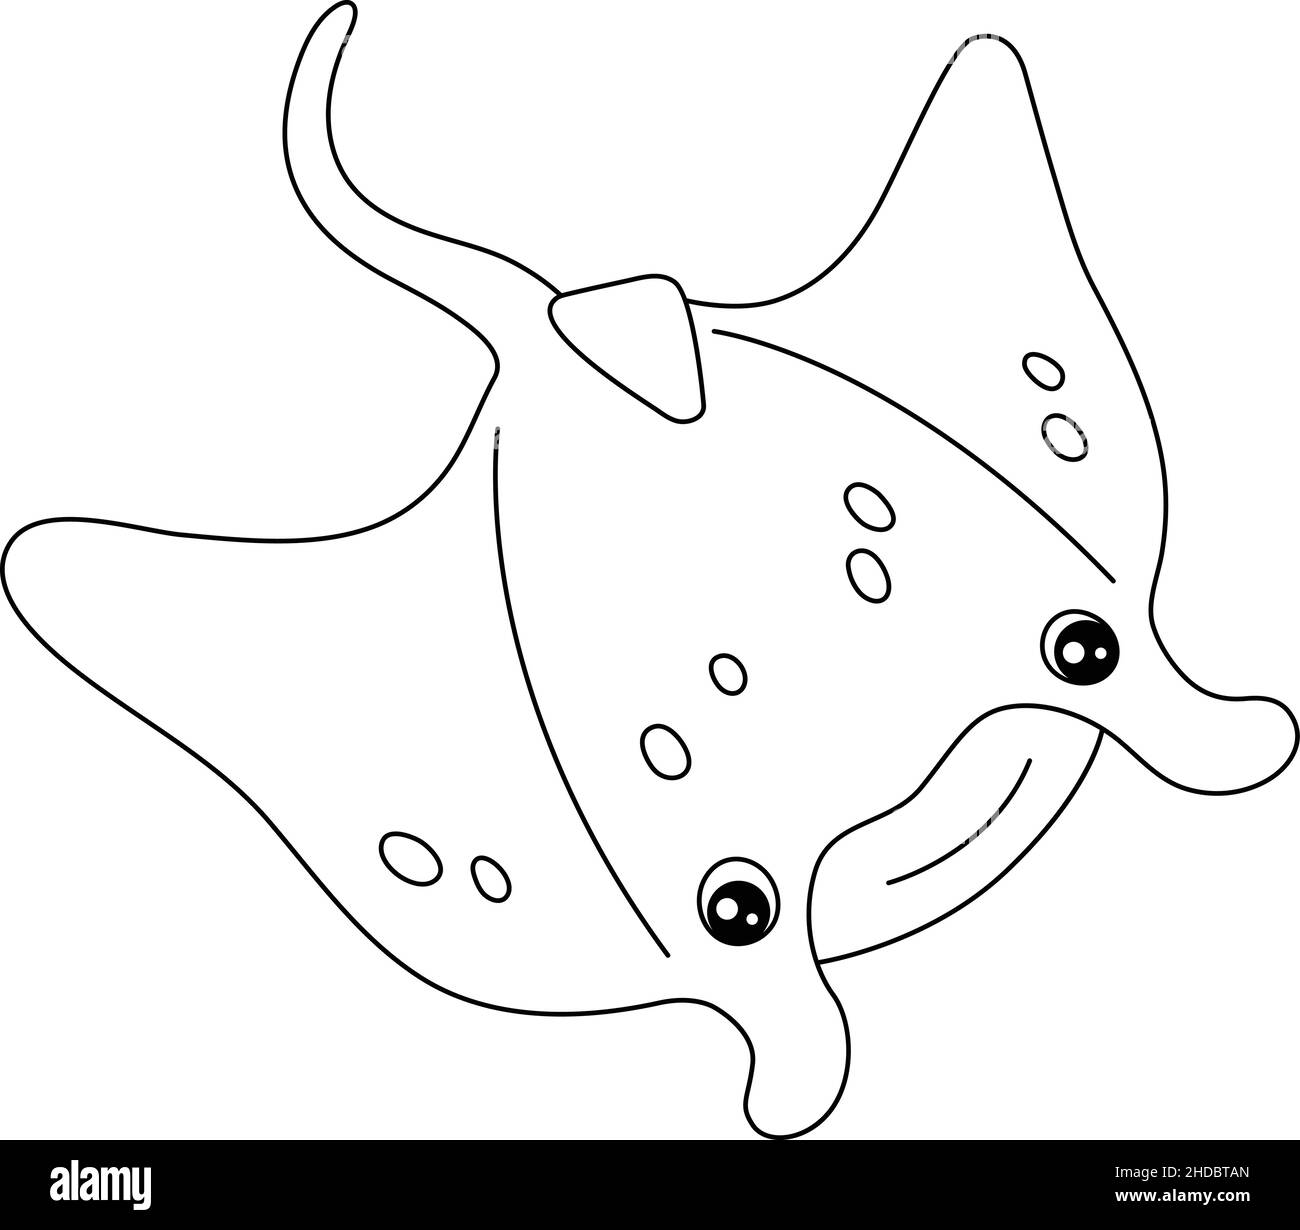 Manta Ray Coloring Page Isolated for Kids Stock Vector